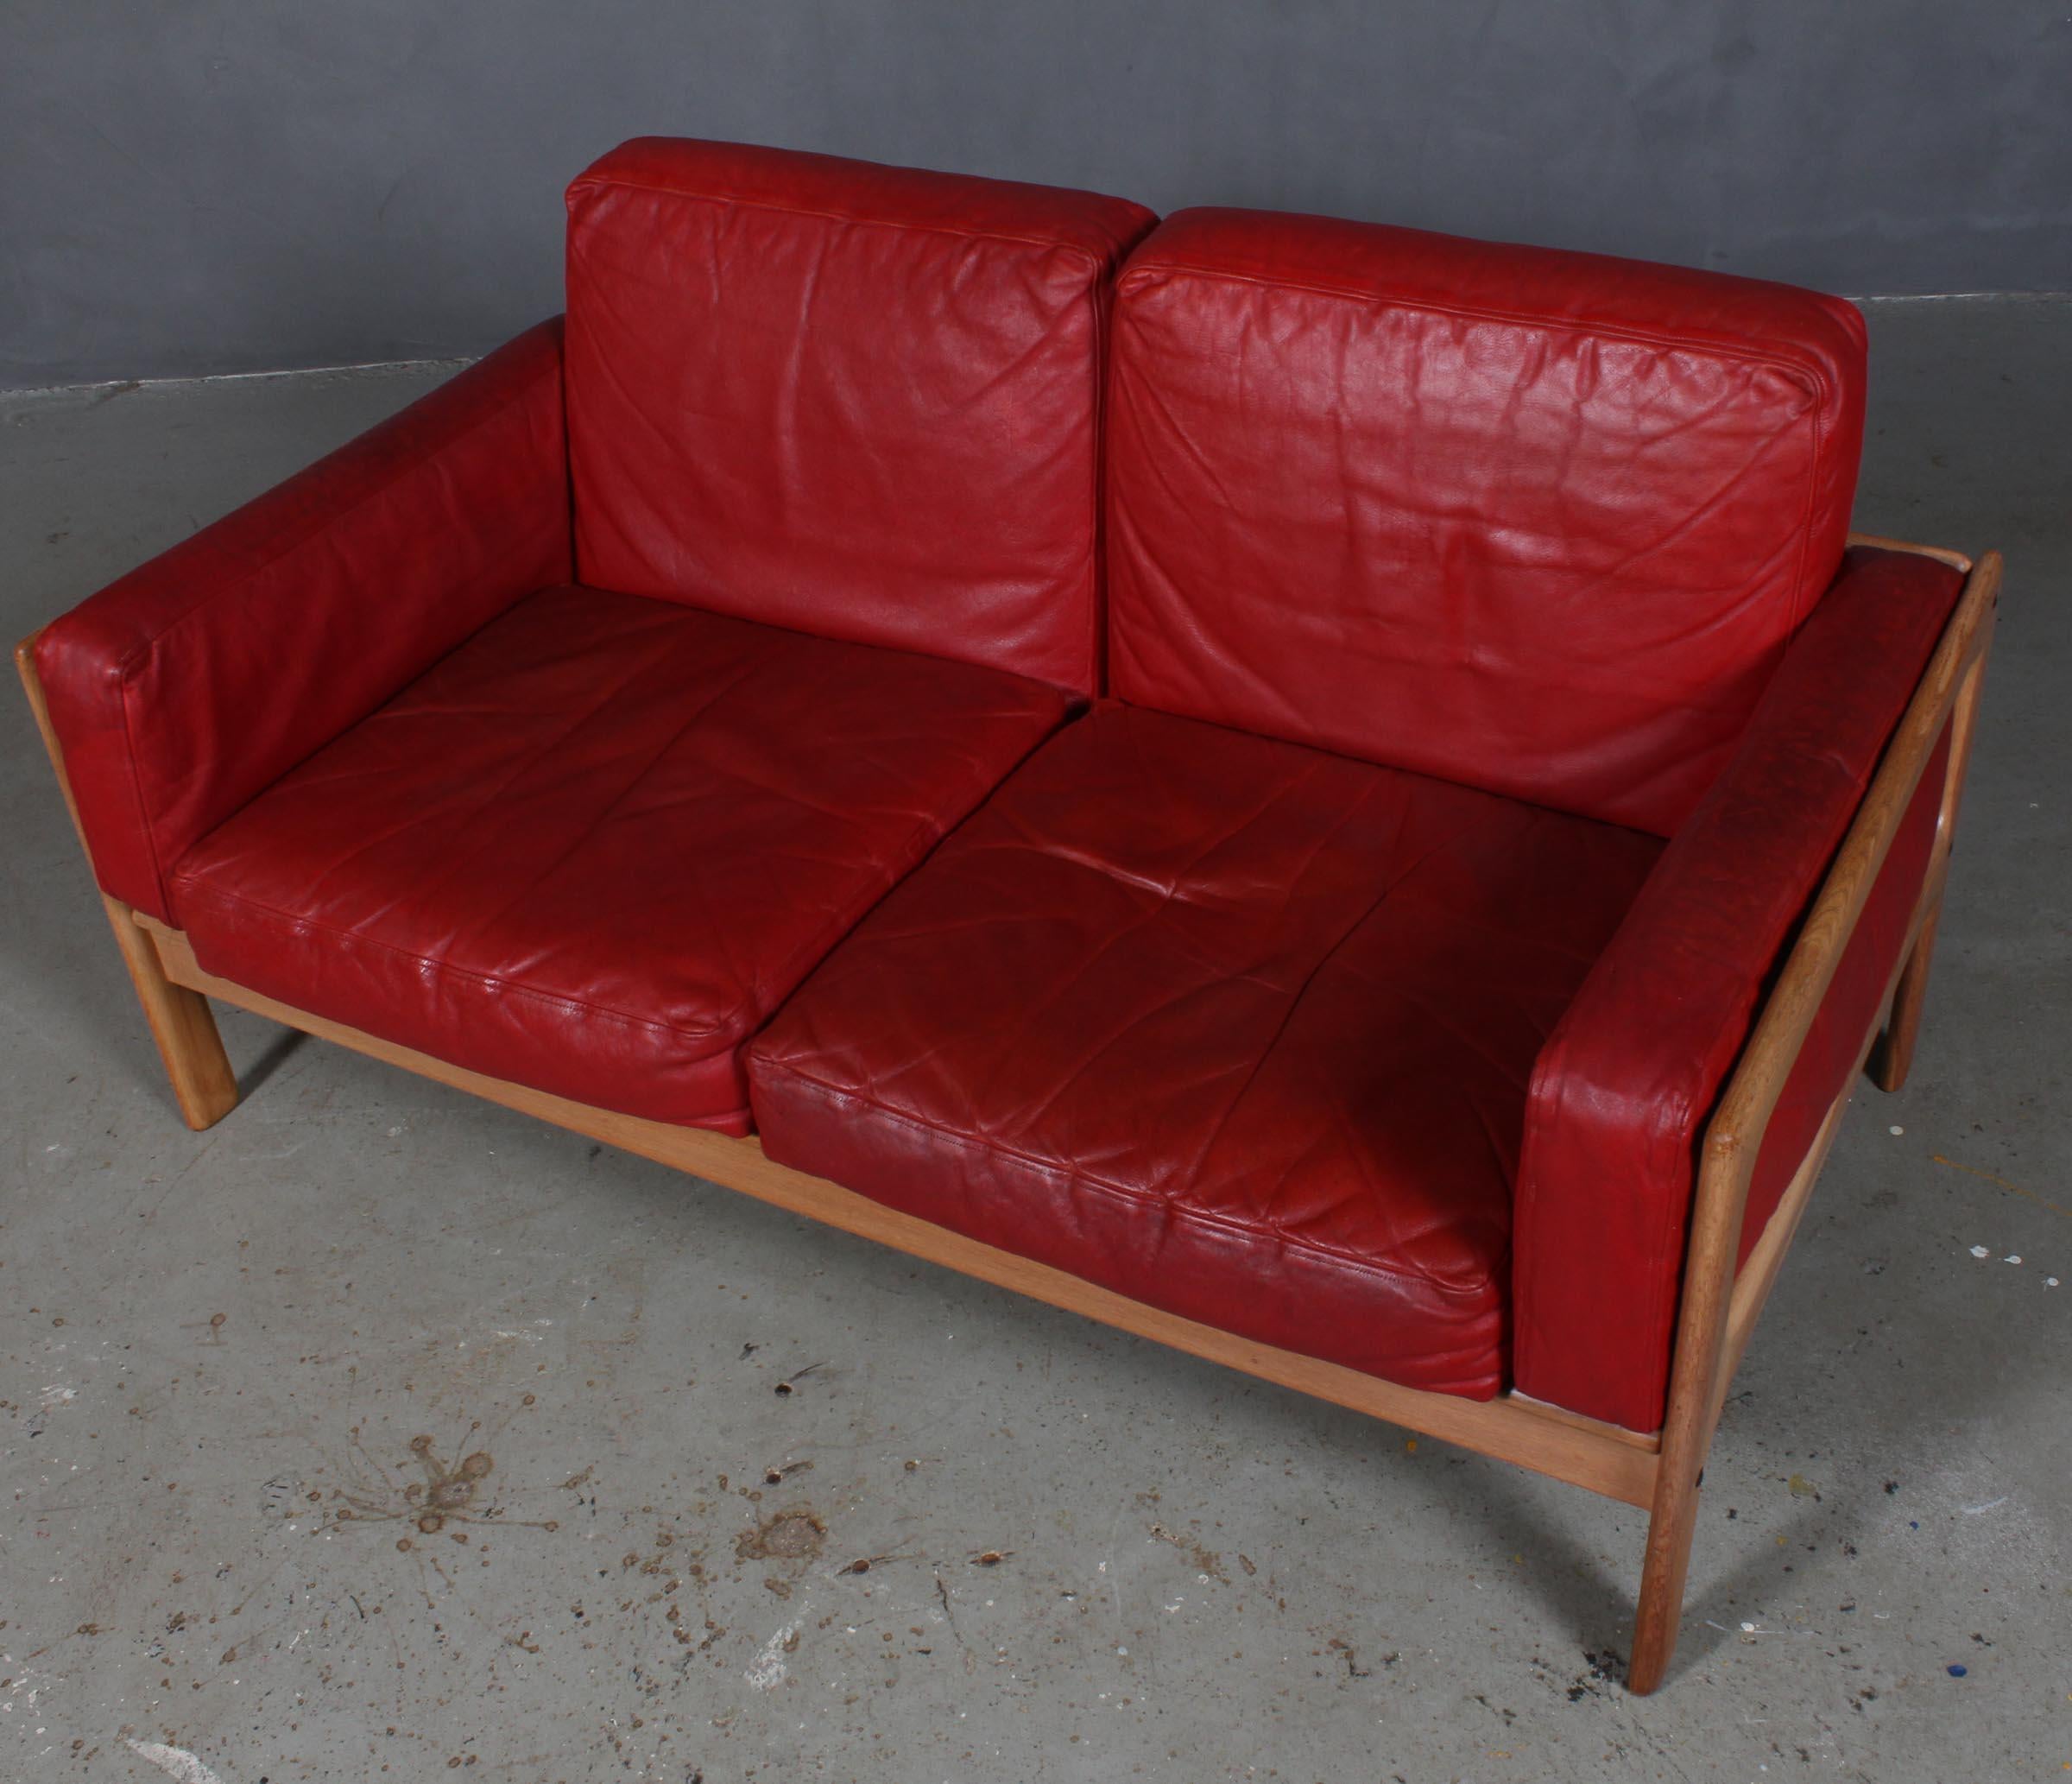 Arne Wahl Iversen. Two seat sofa, with frame of oak. Original cushions with red leather.
Manufactured by Komfort.

 